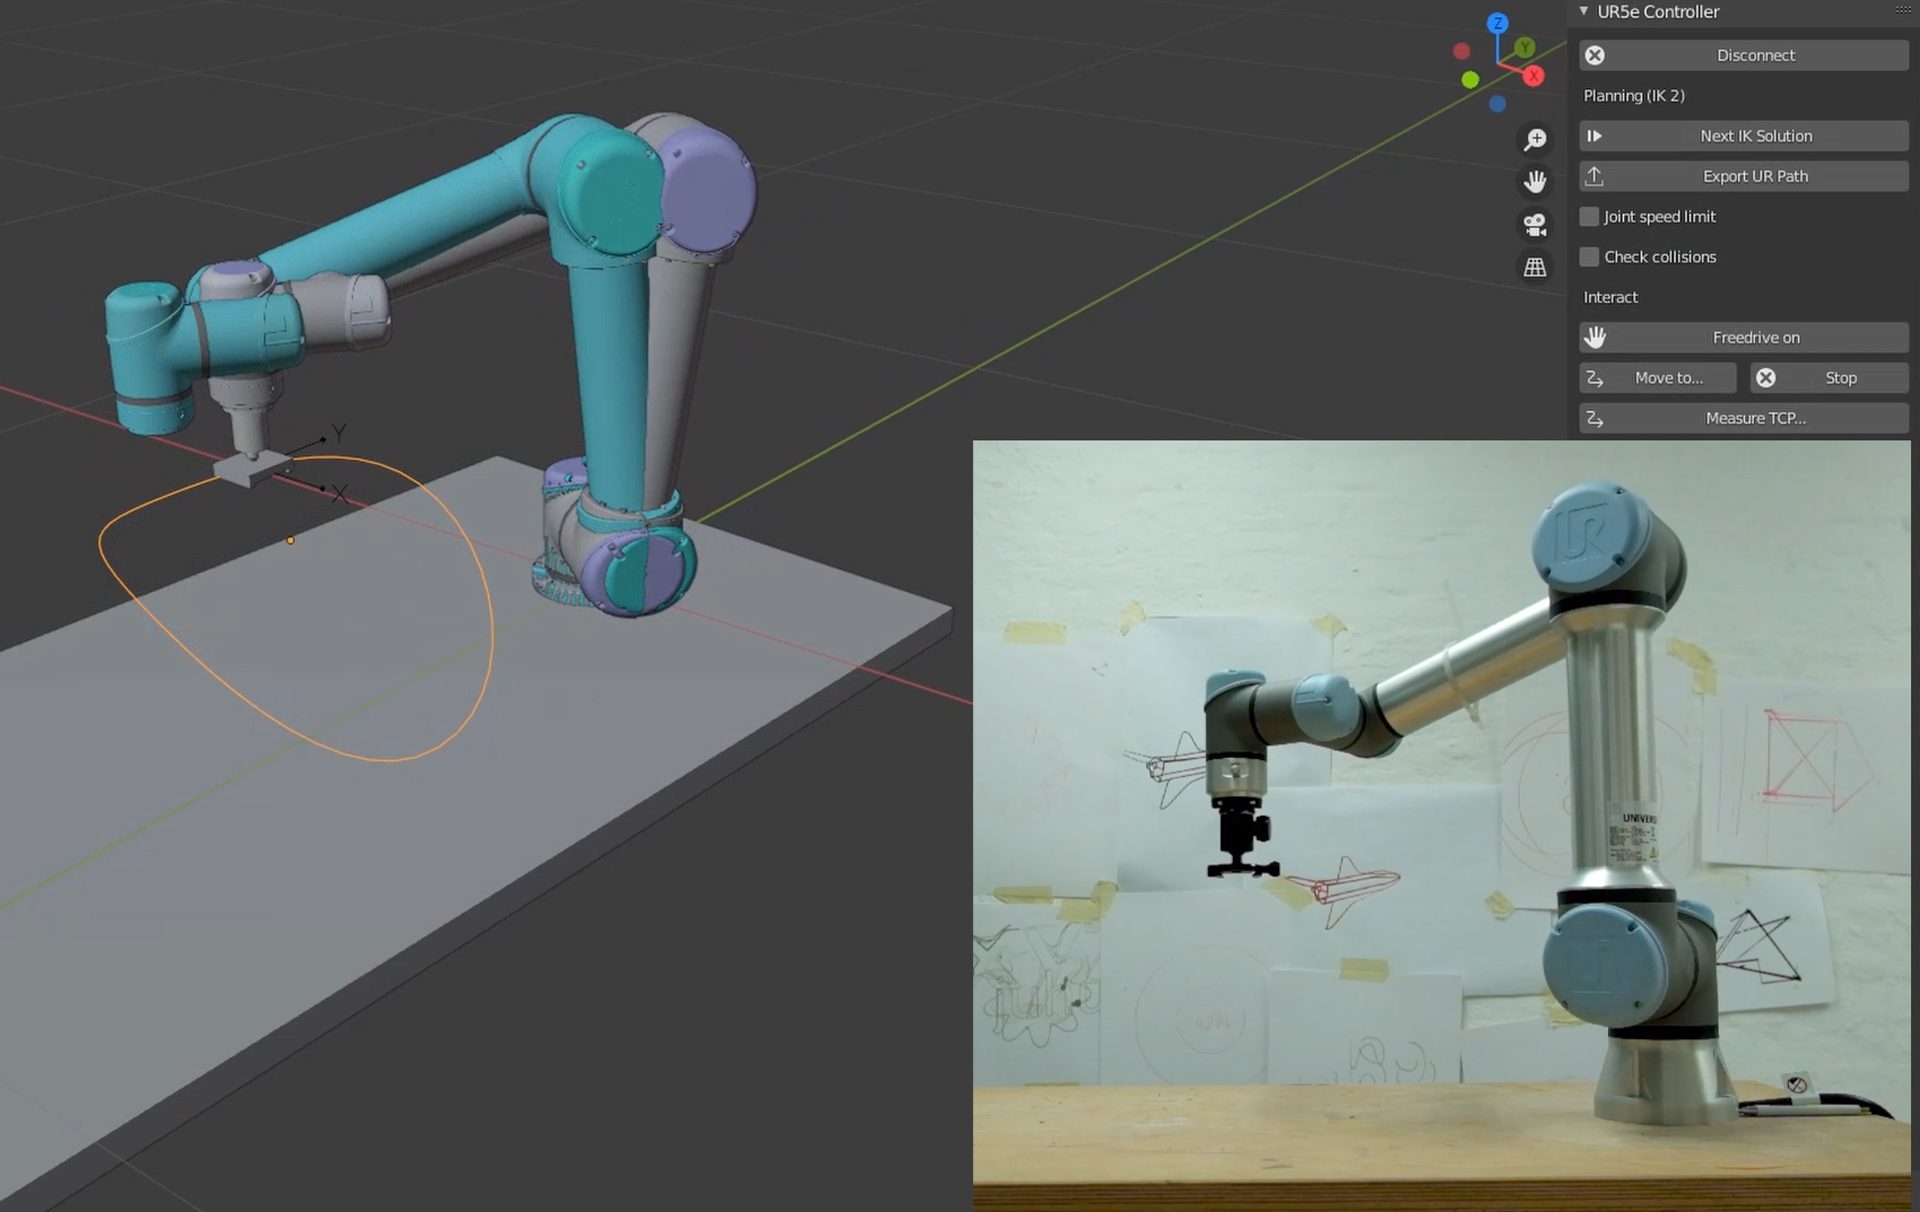 Real time control with visualization of the actual robot position